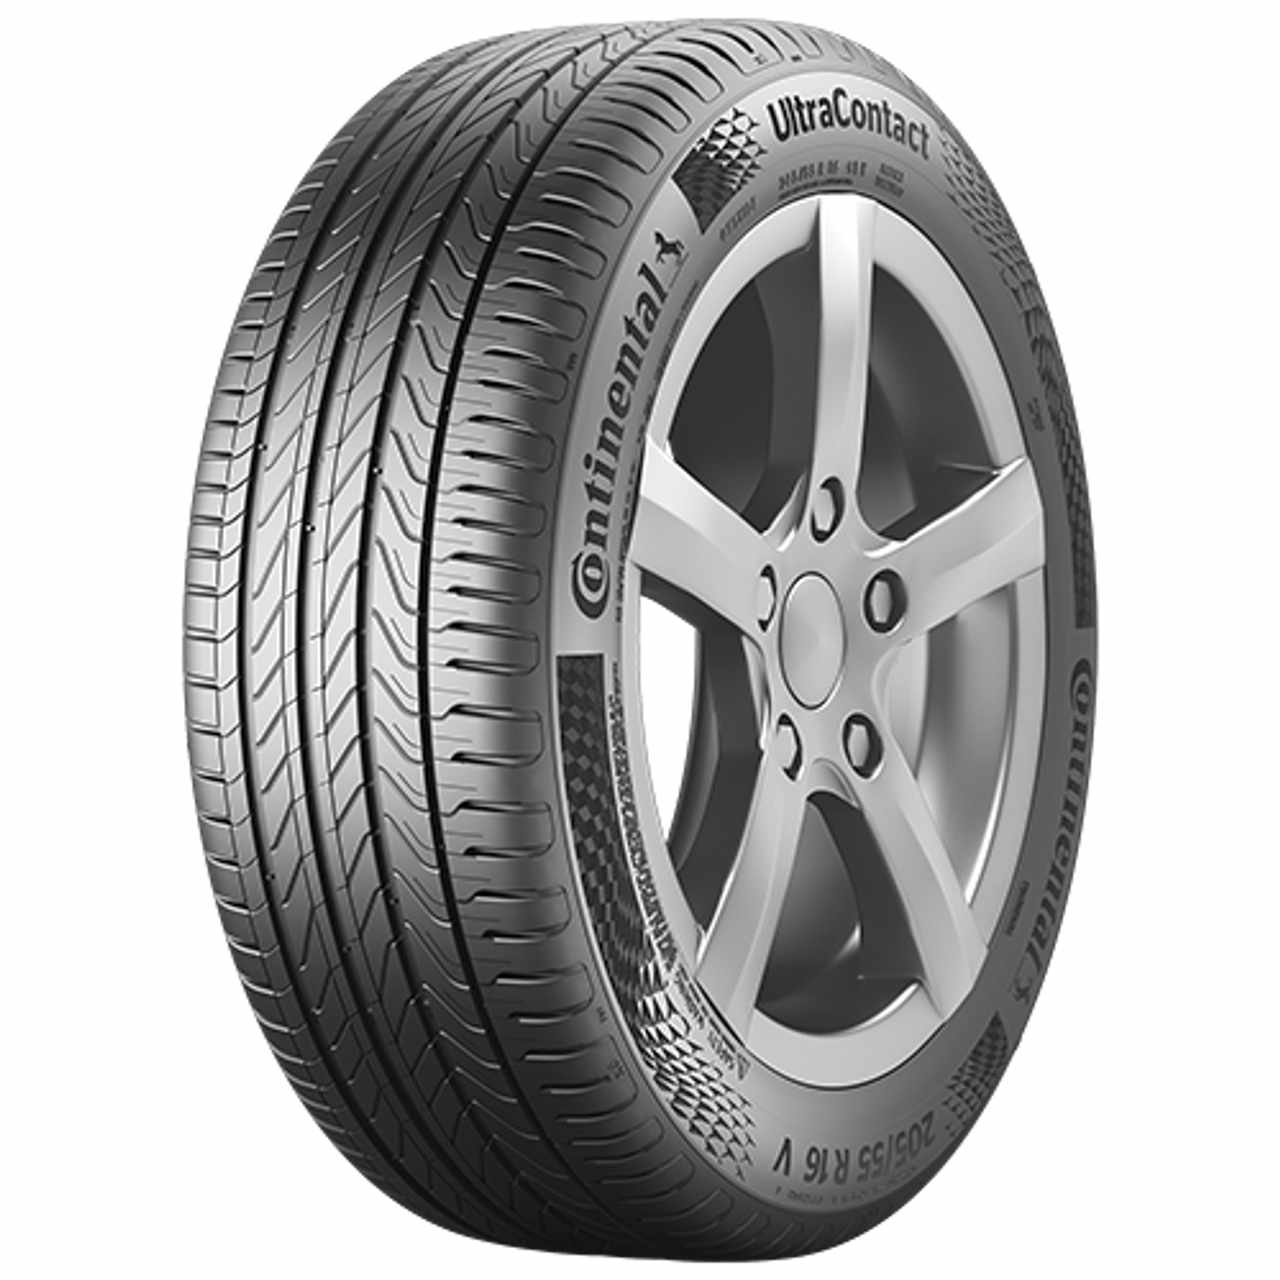 CONTINENTAL ULTRACONTACT (EVc) 165/65R15 81T BSW